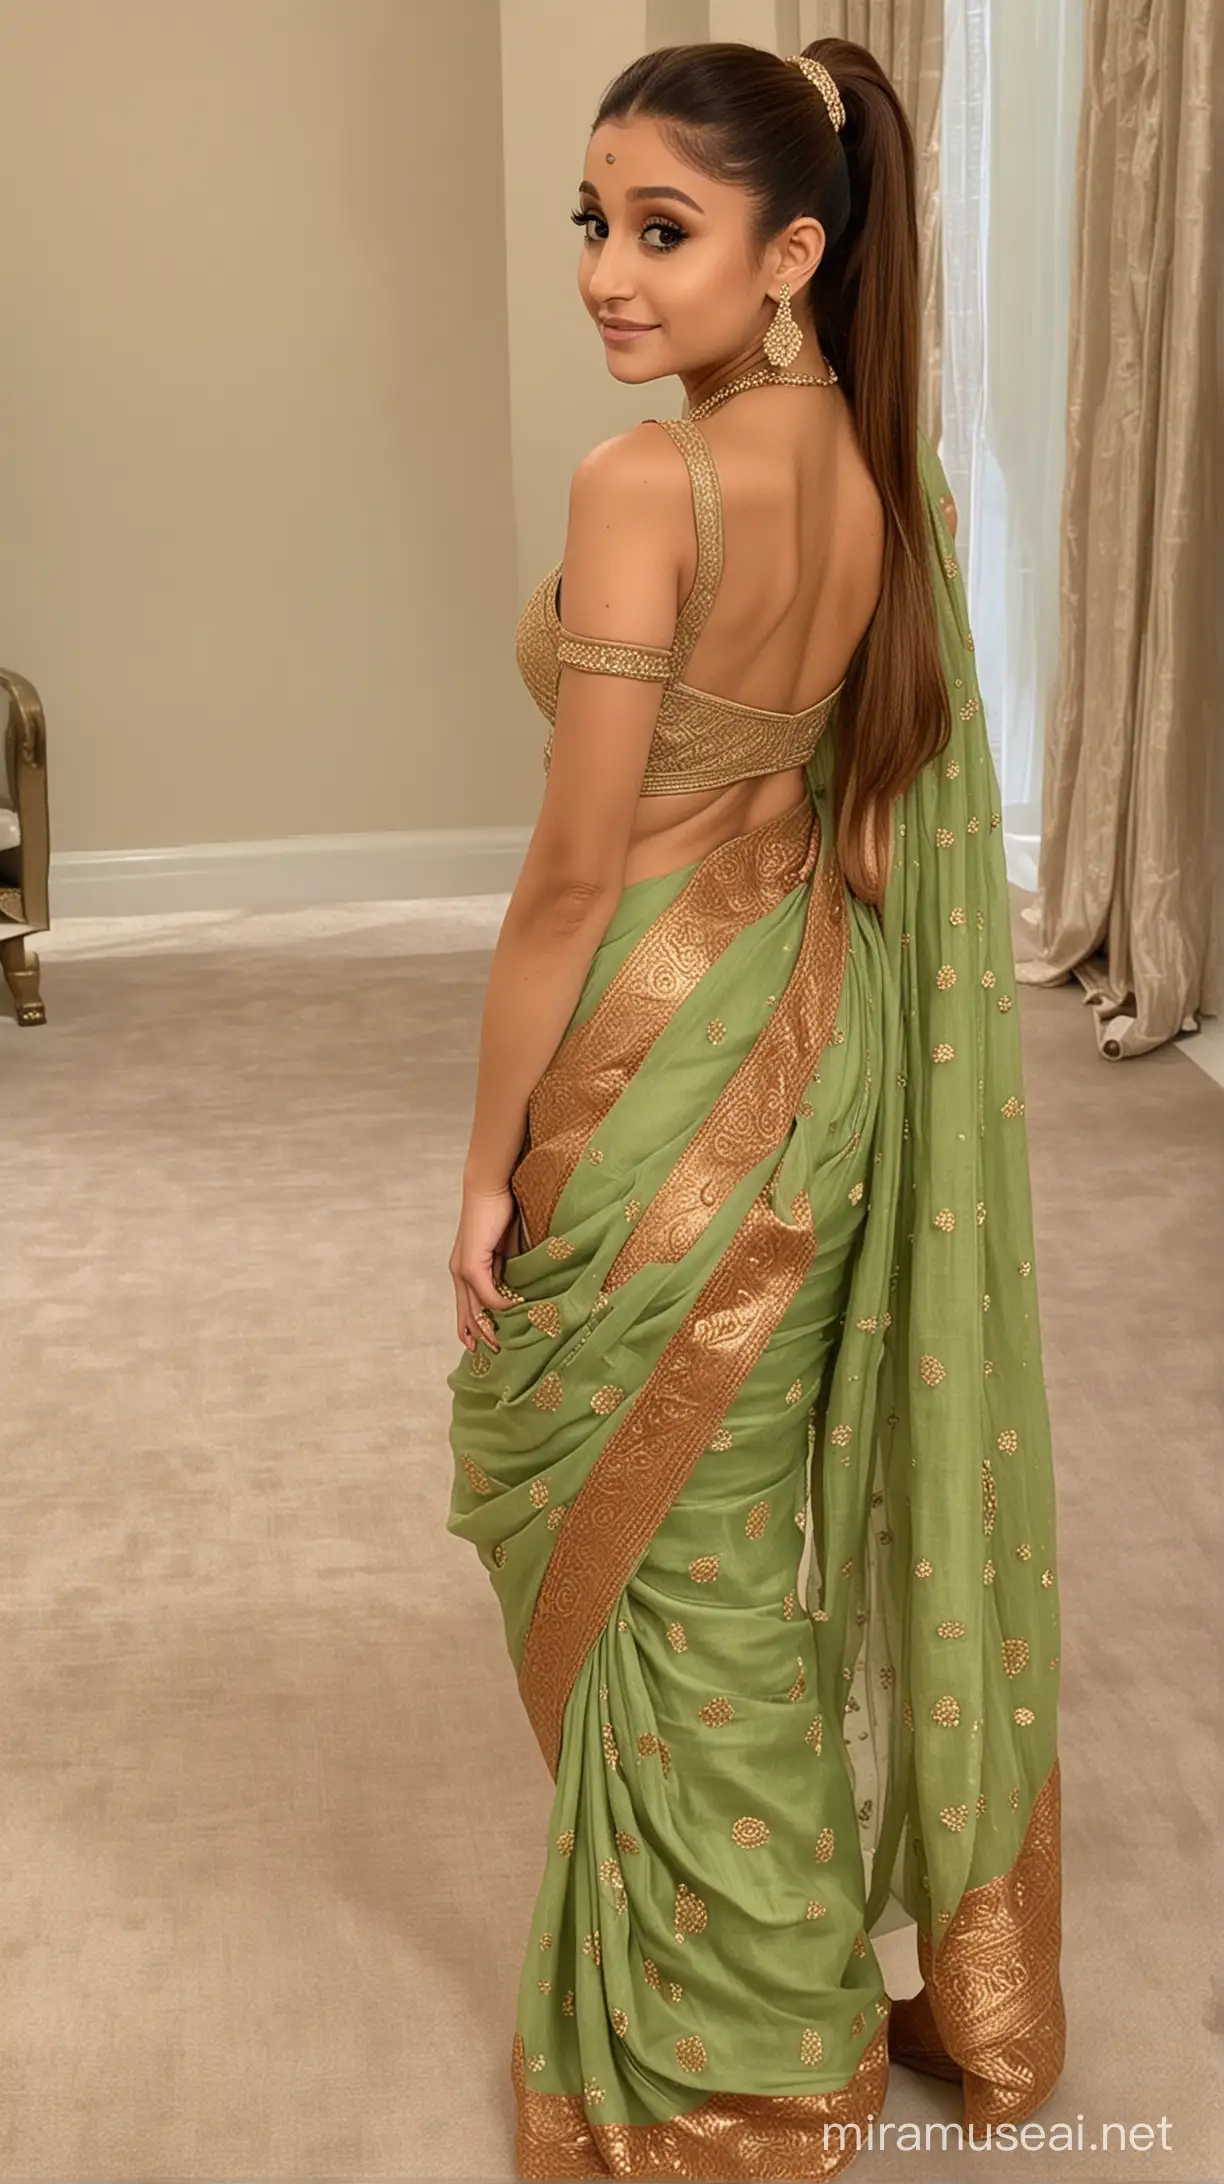 Ariana Grande Stunning in Backless Indian Style Saree